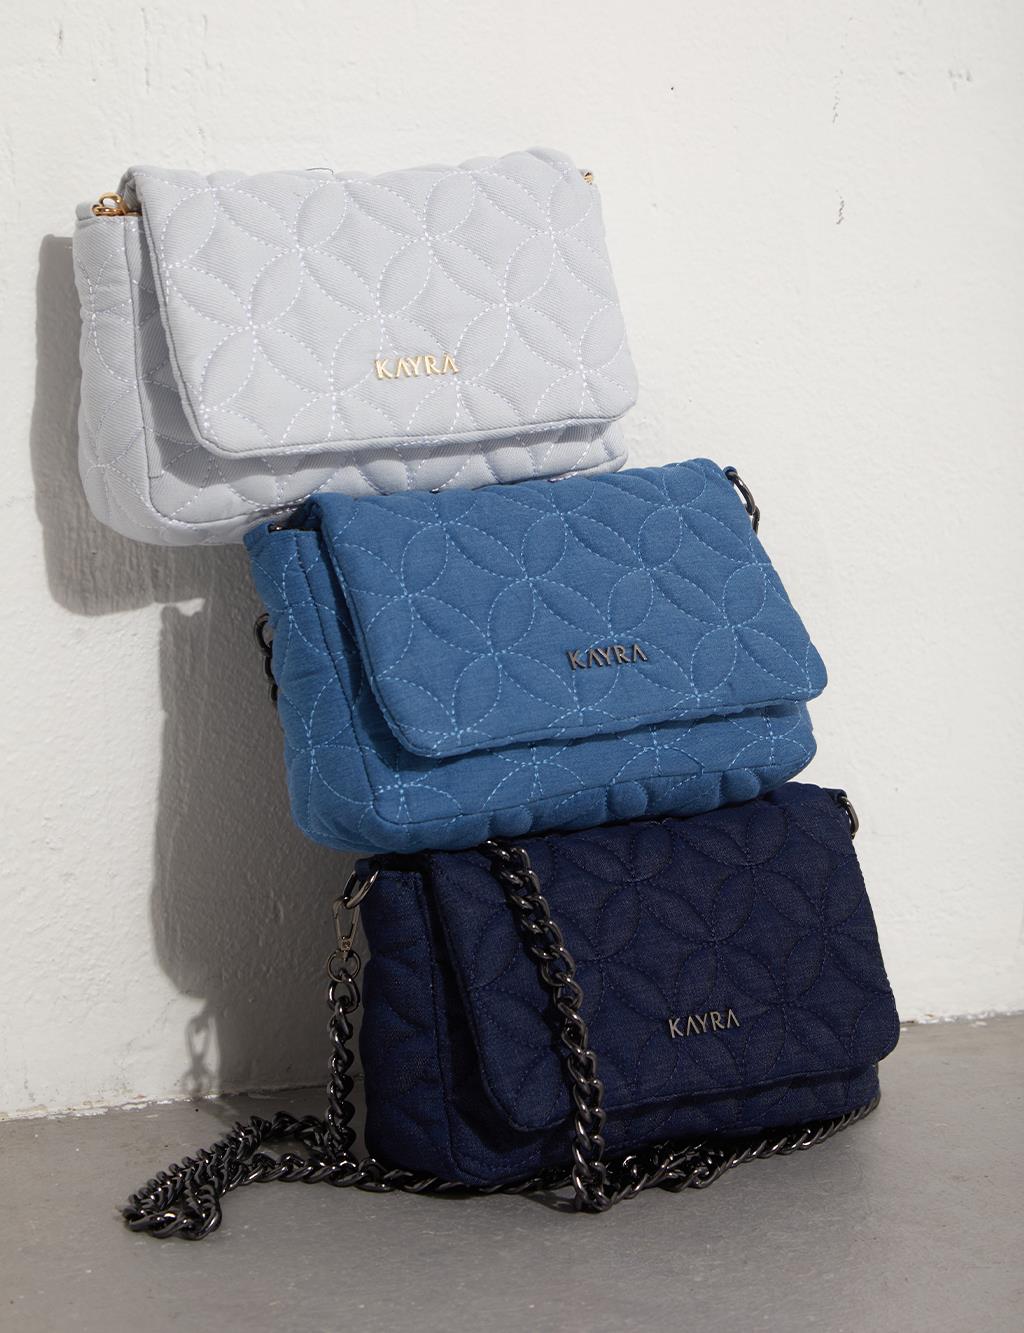 Quilted Fabric Bag Navy